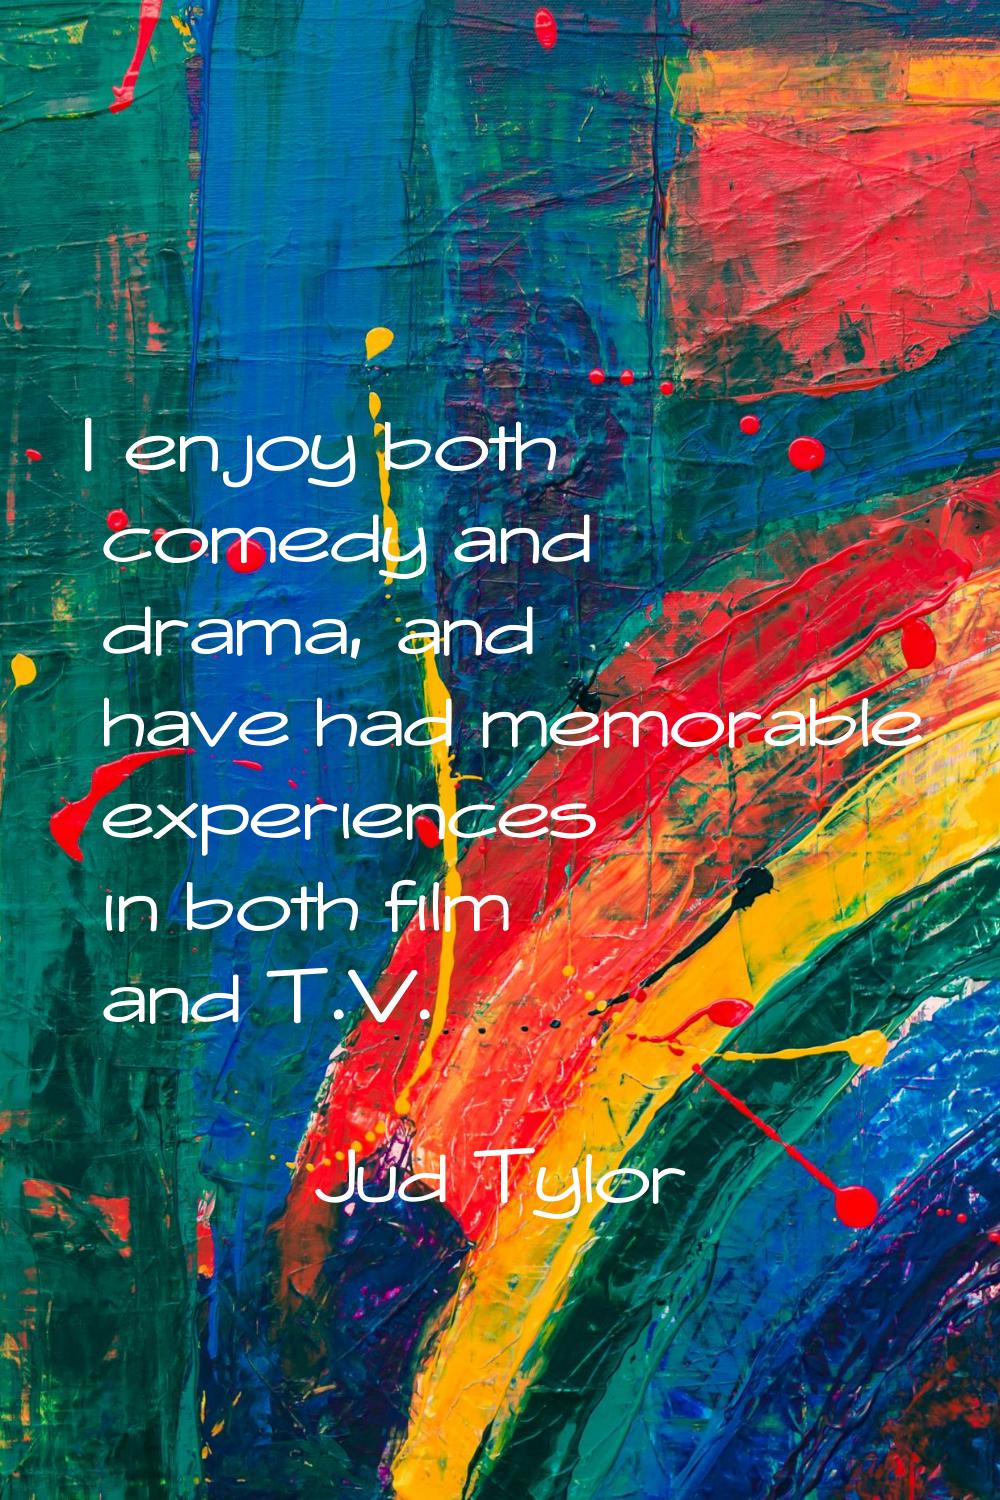 I enjoy both comedy and drama, and have had memorable experiences in both film and T.V.